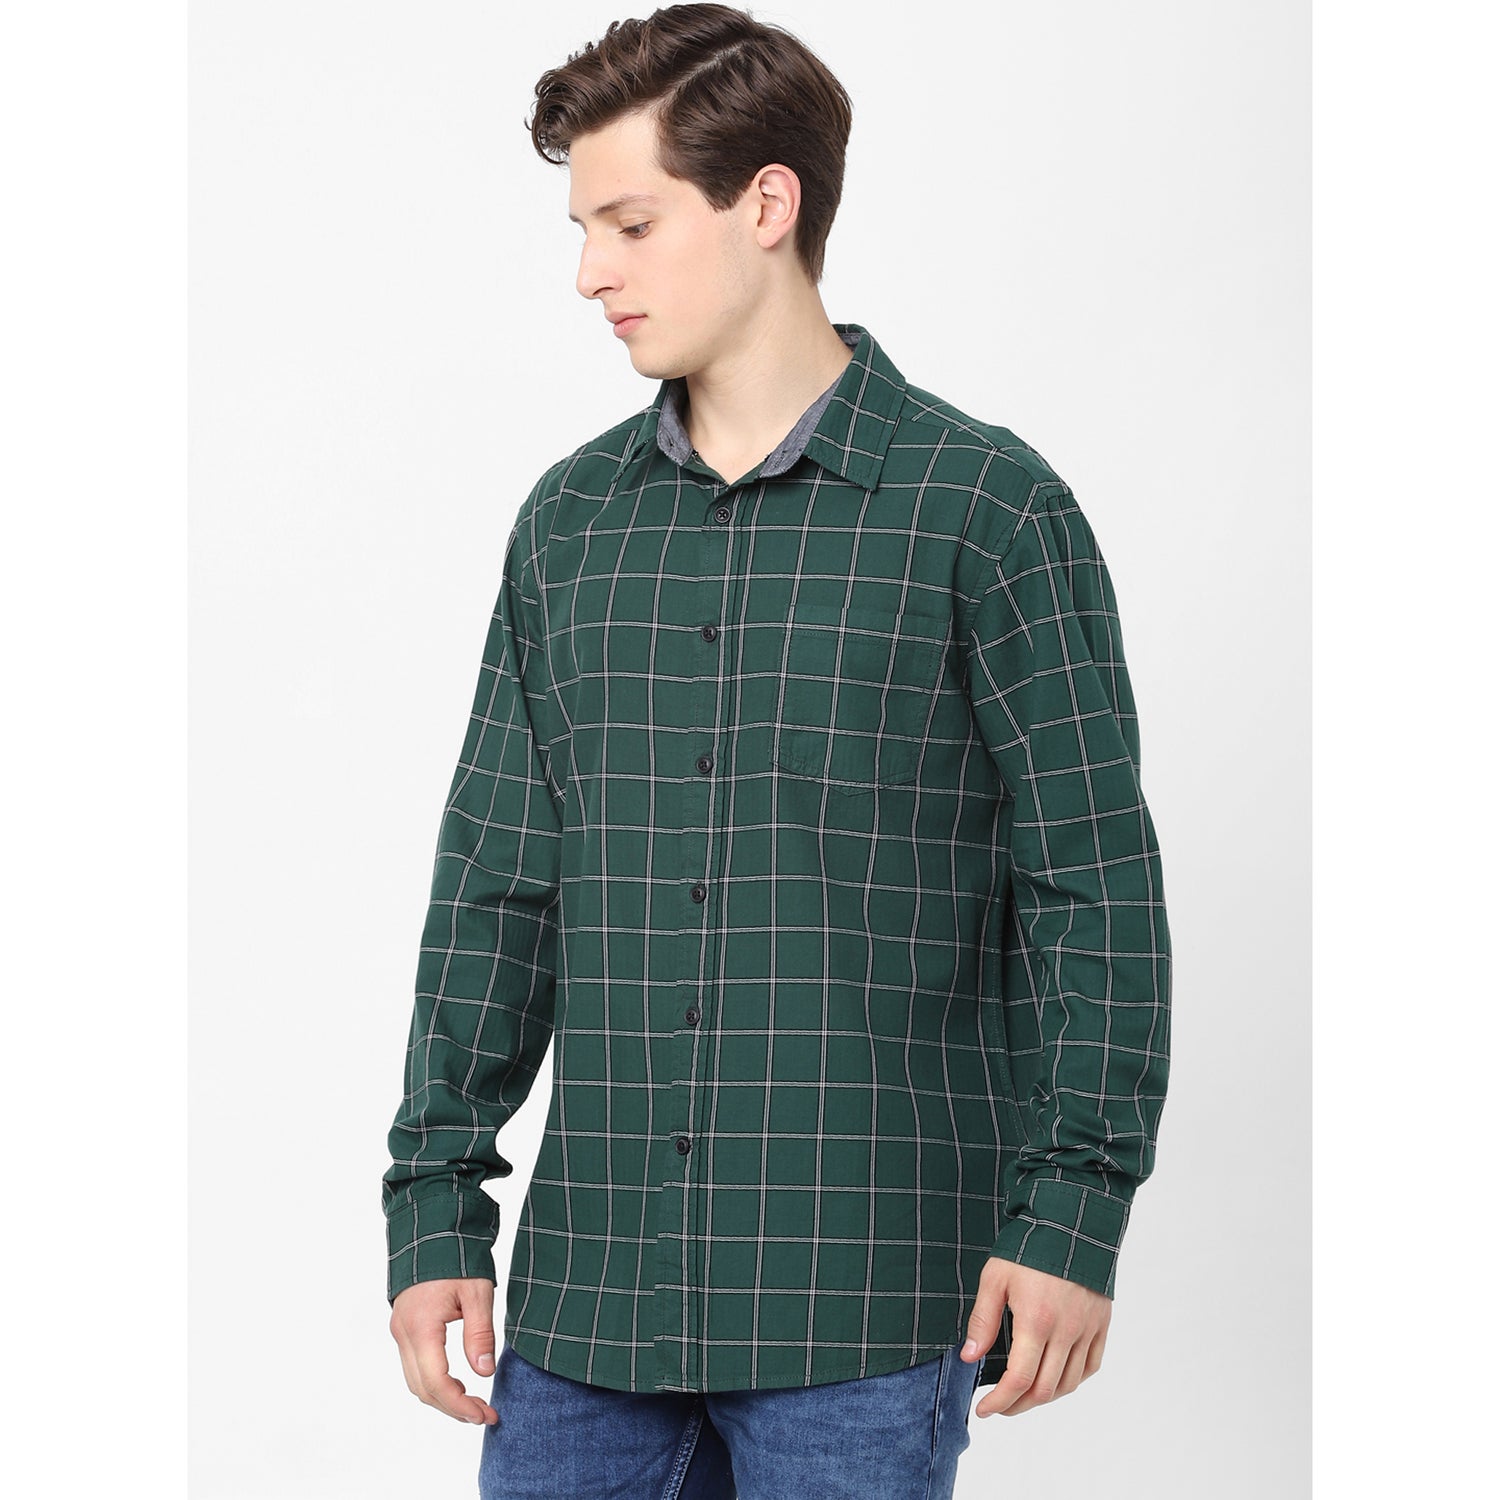 Green and White Slim Fit Checked Cotton Casual Shirt (VACHECK1)